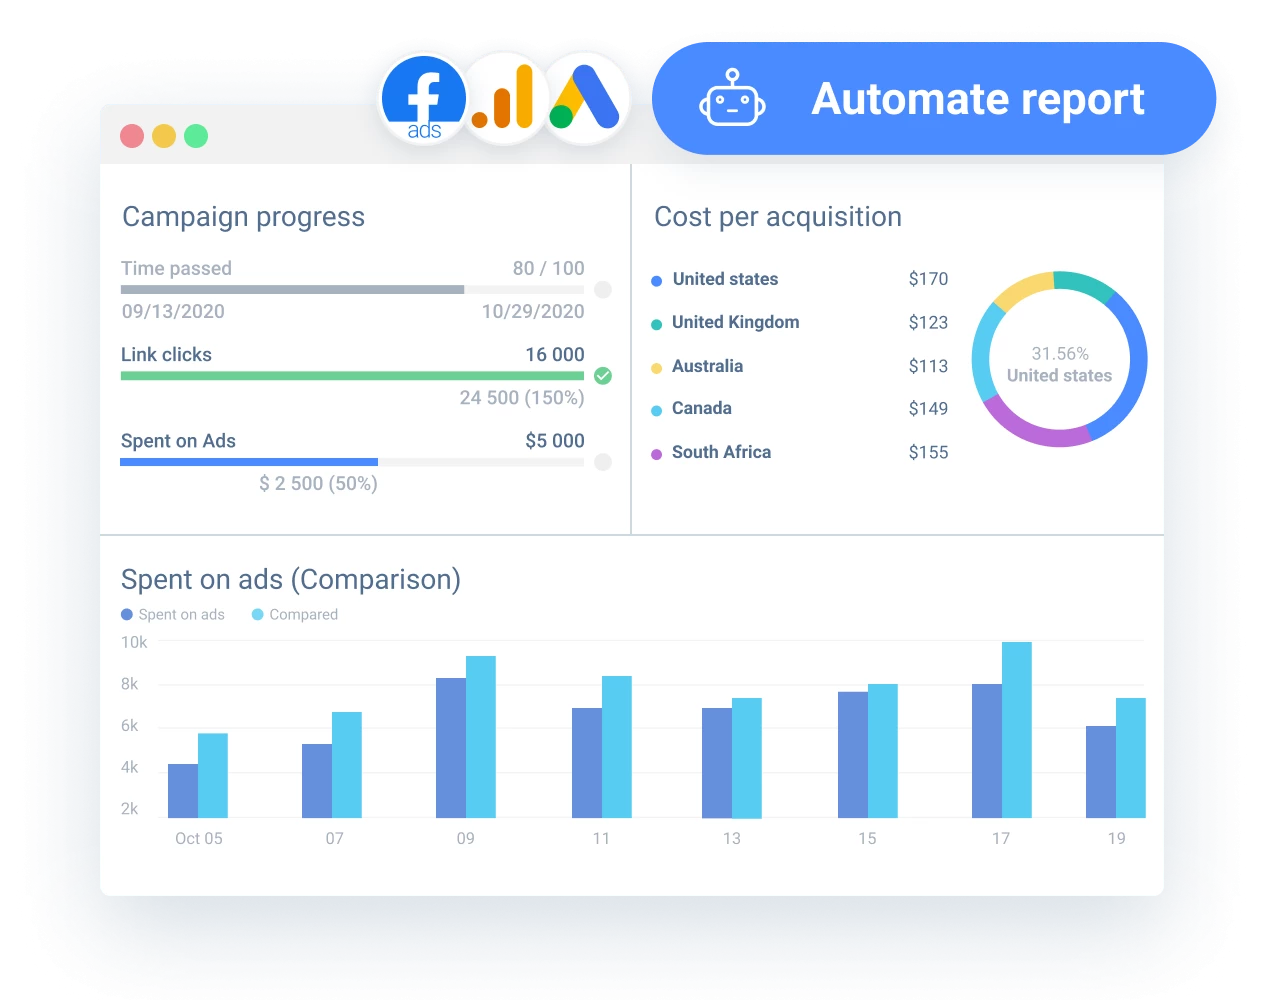 saas-automation-report